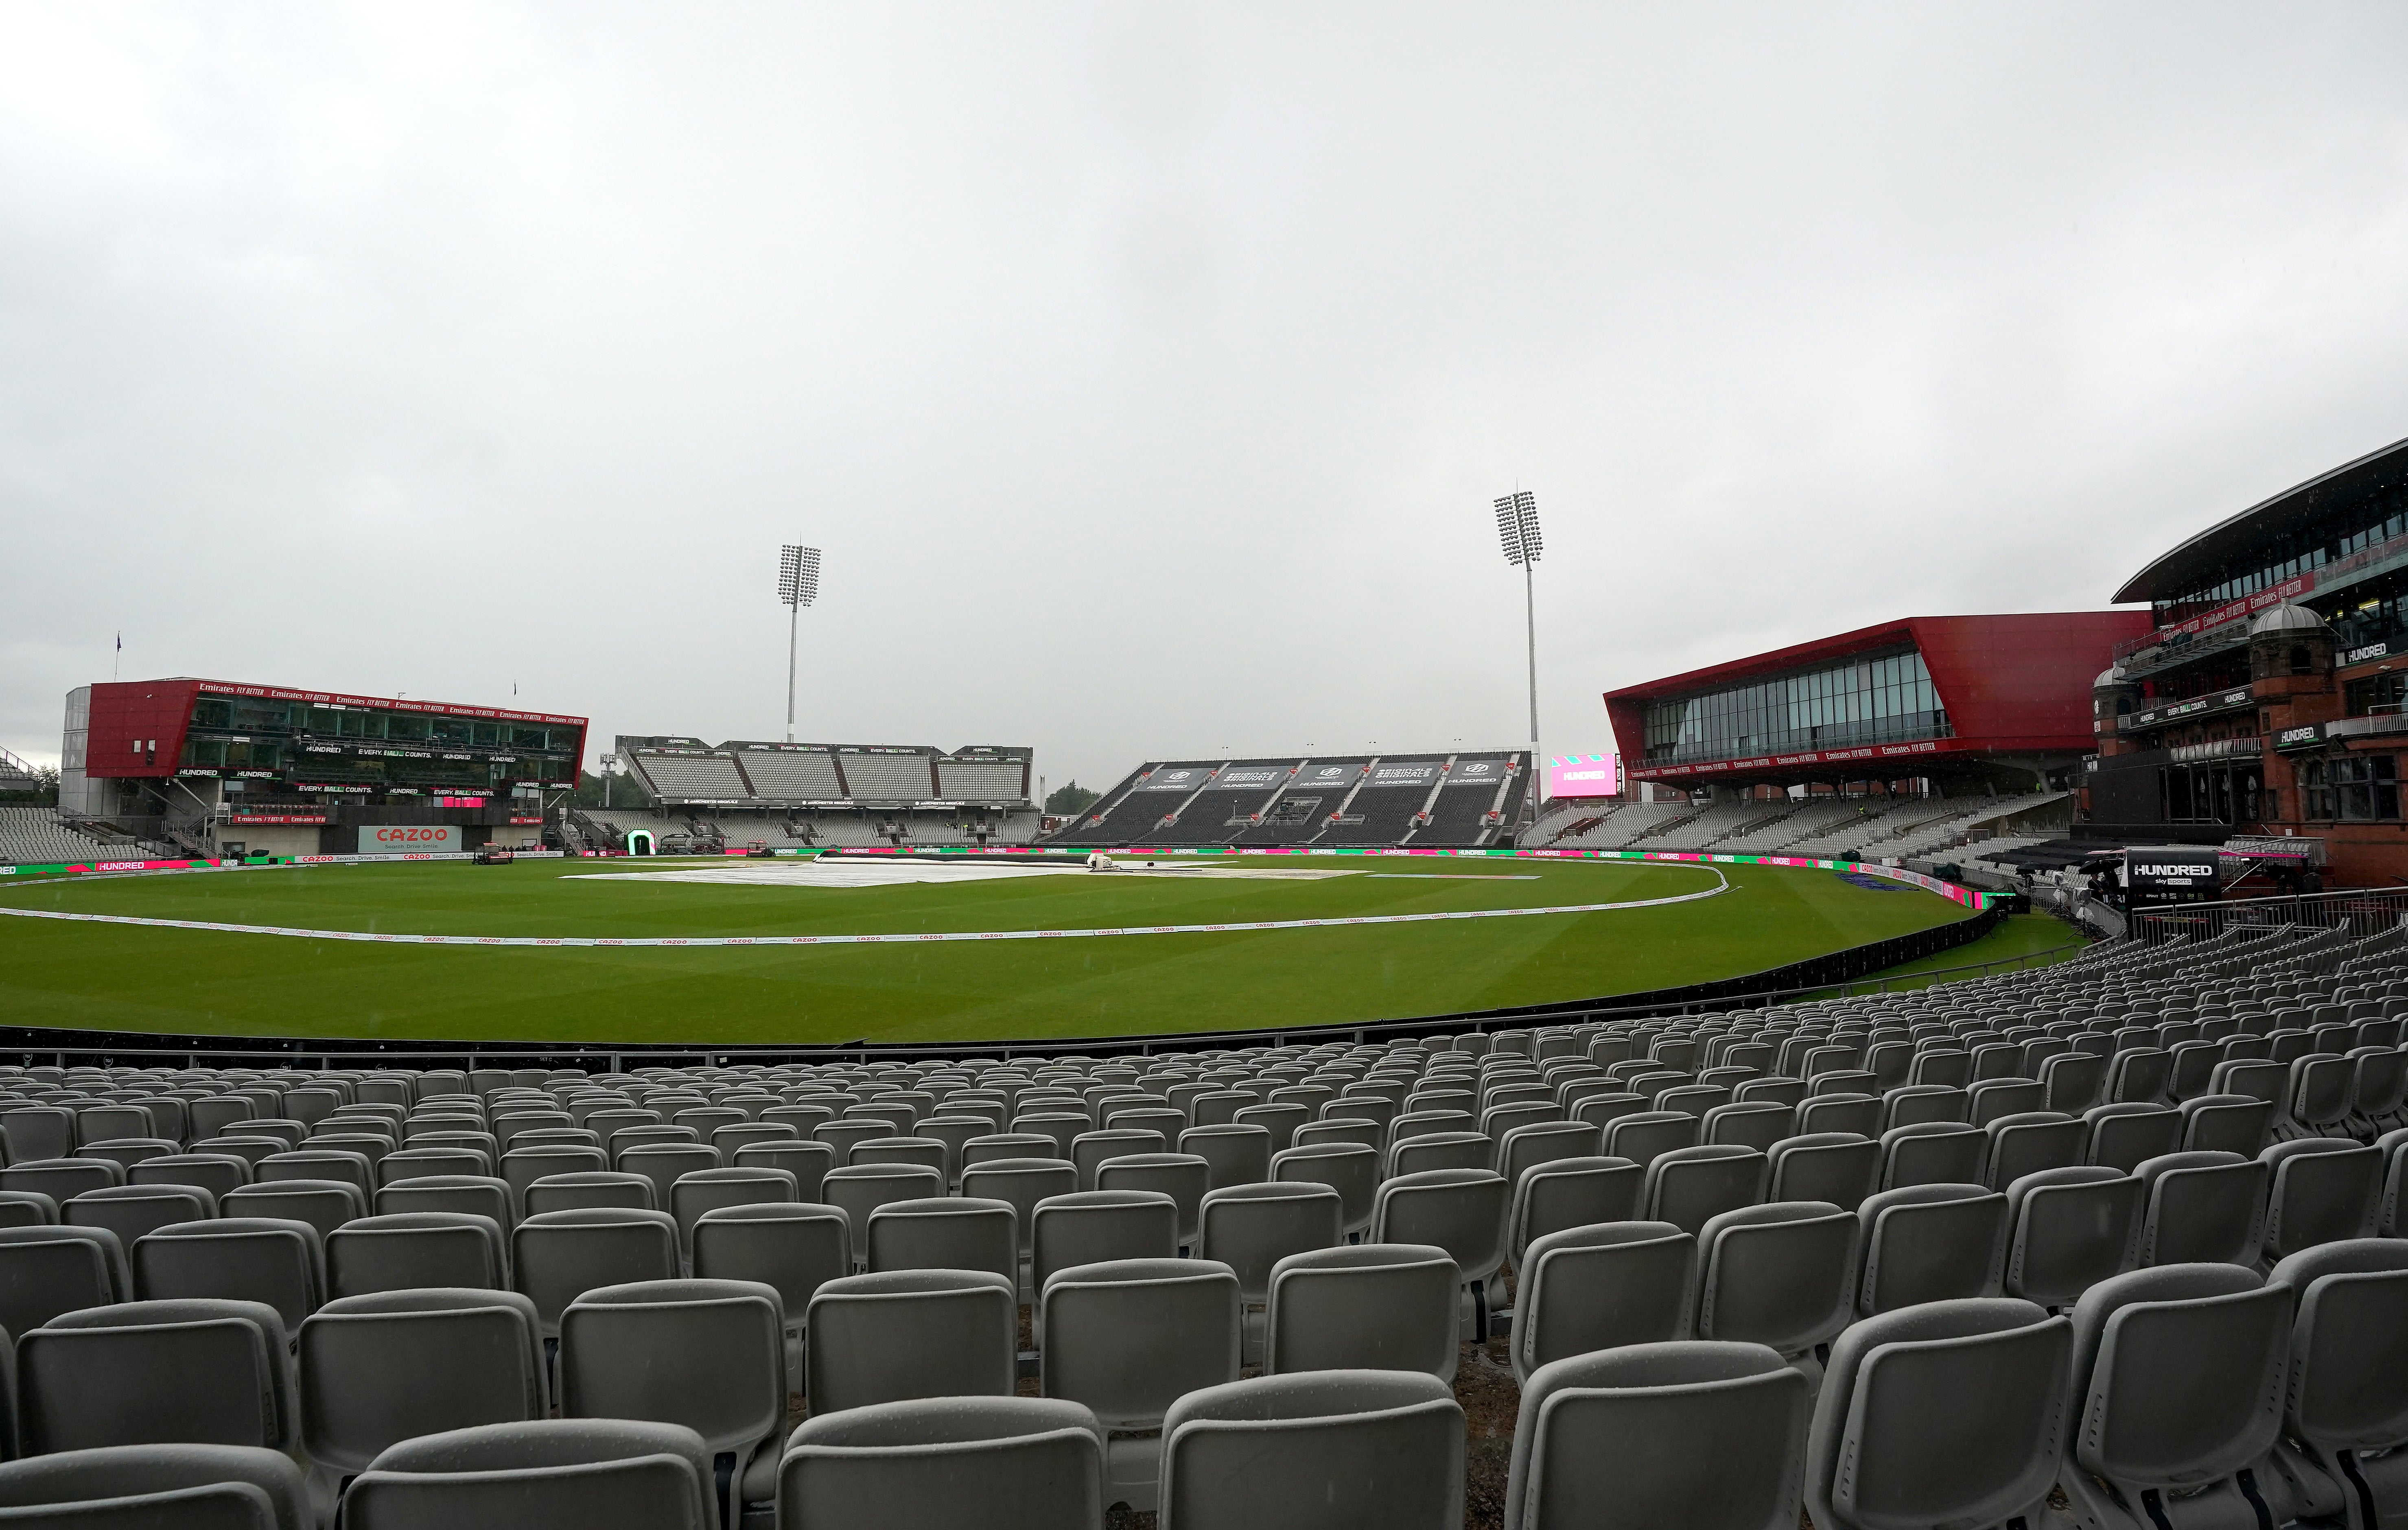 The Test match at Old Trafford has been cancelled